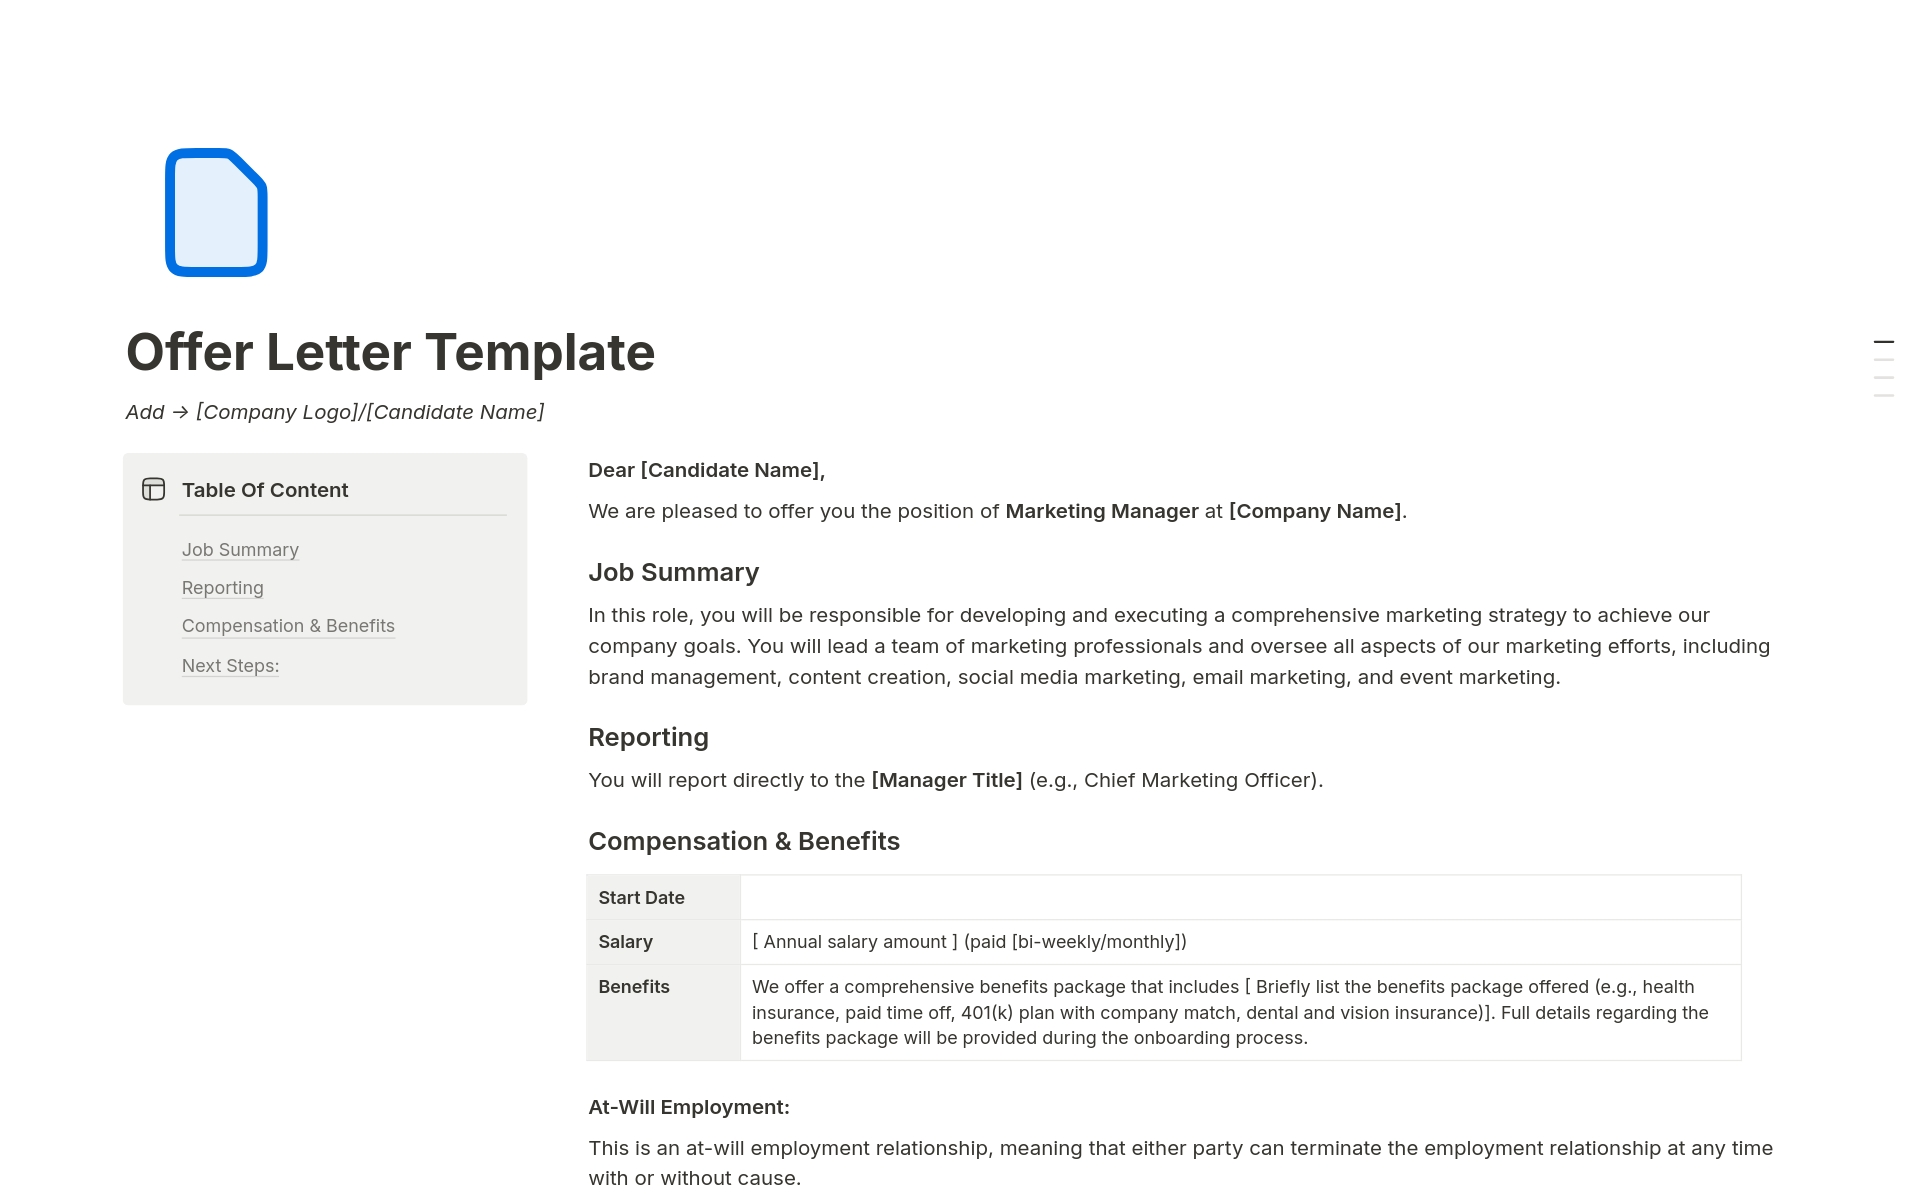 Streamline Your Hiring Process with a Professional Notion Offer Letter Template